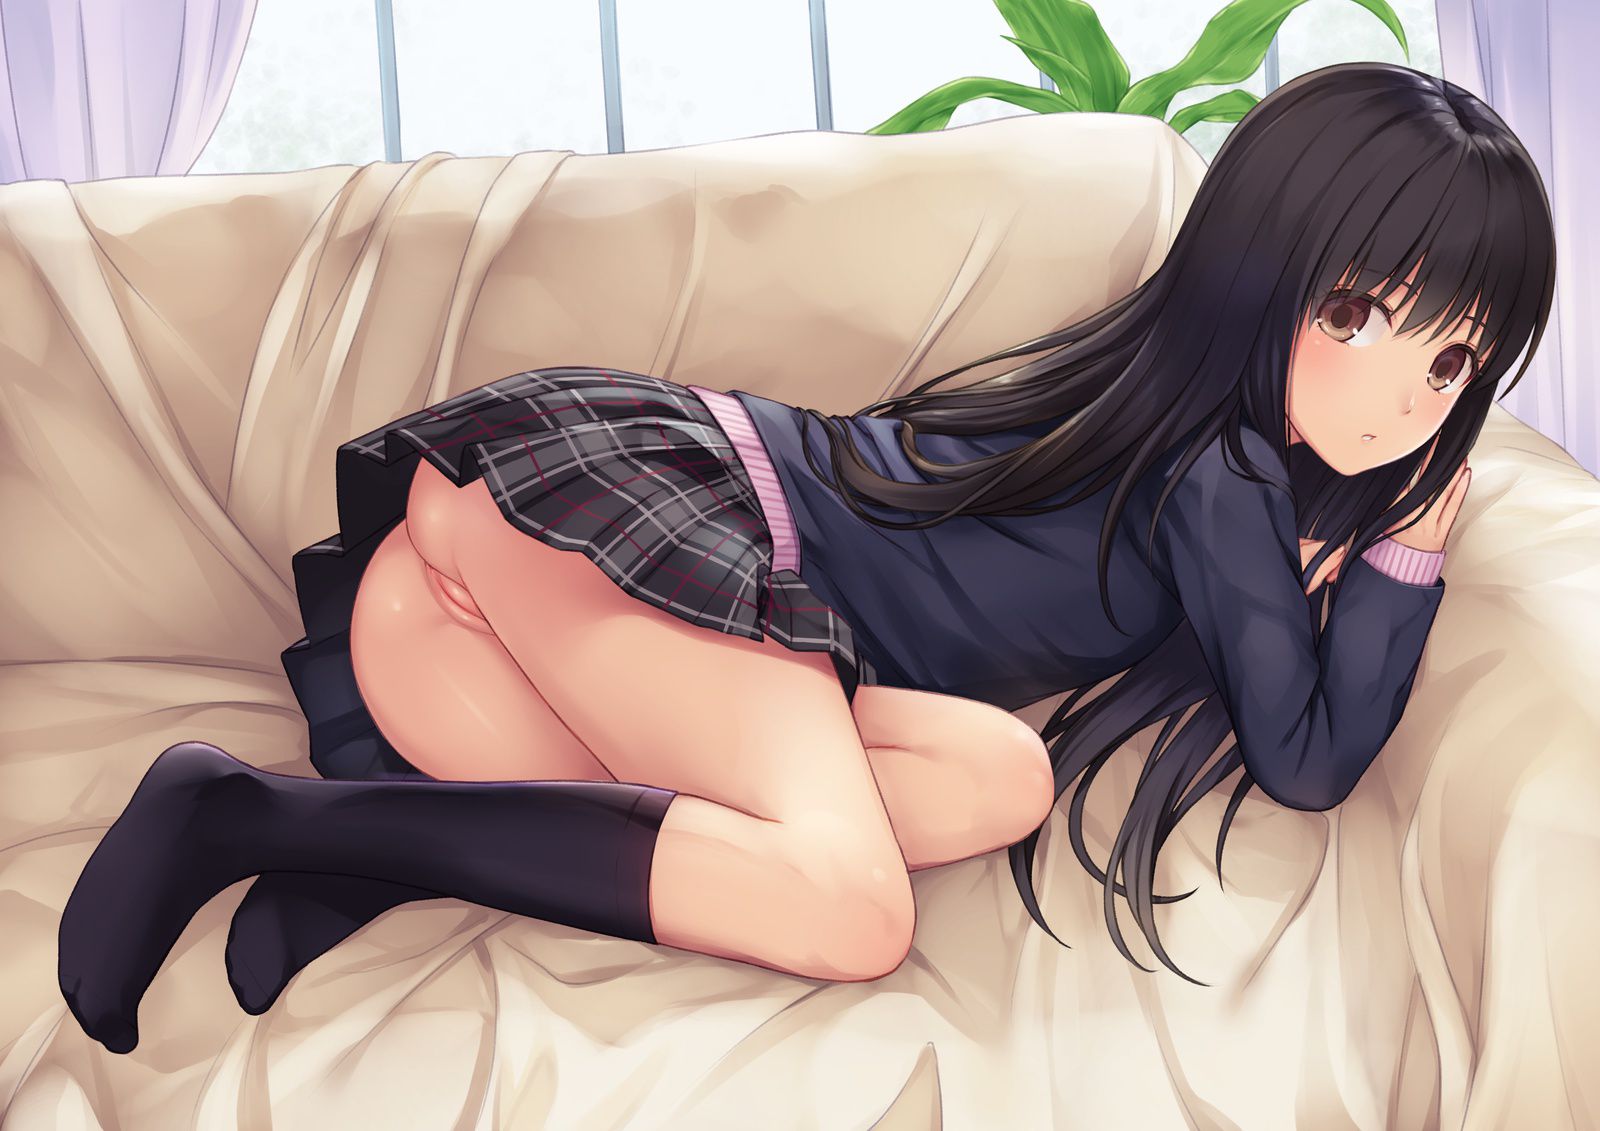 Cute and naughty image of a schoolgirl! Part7 4